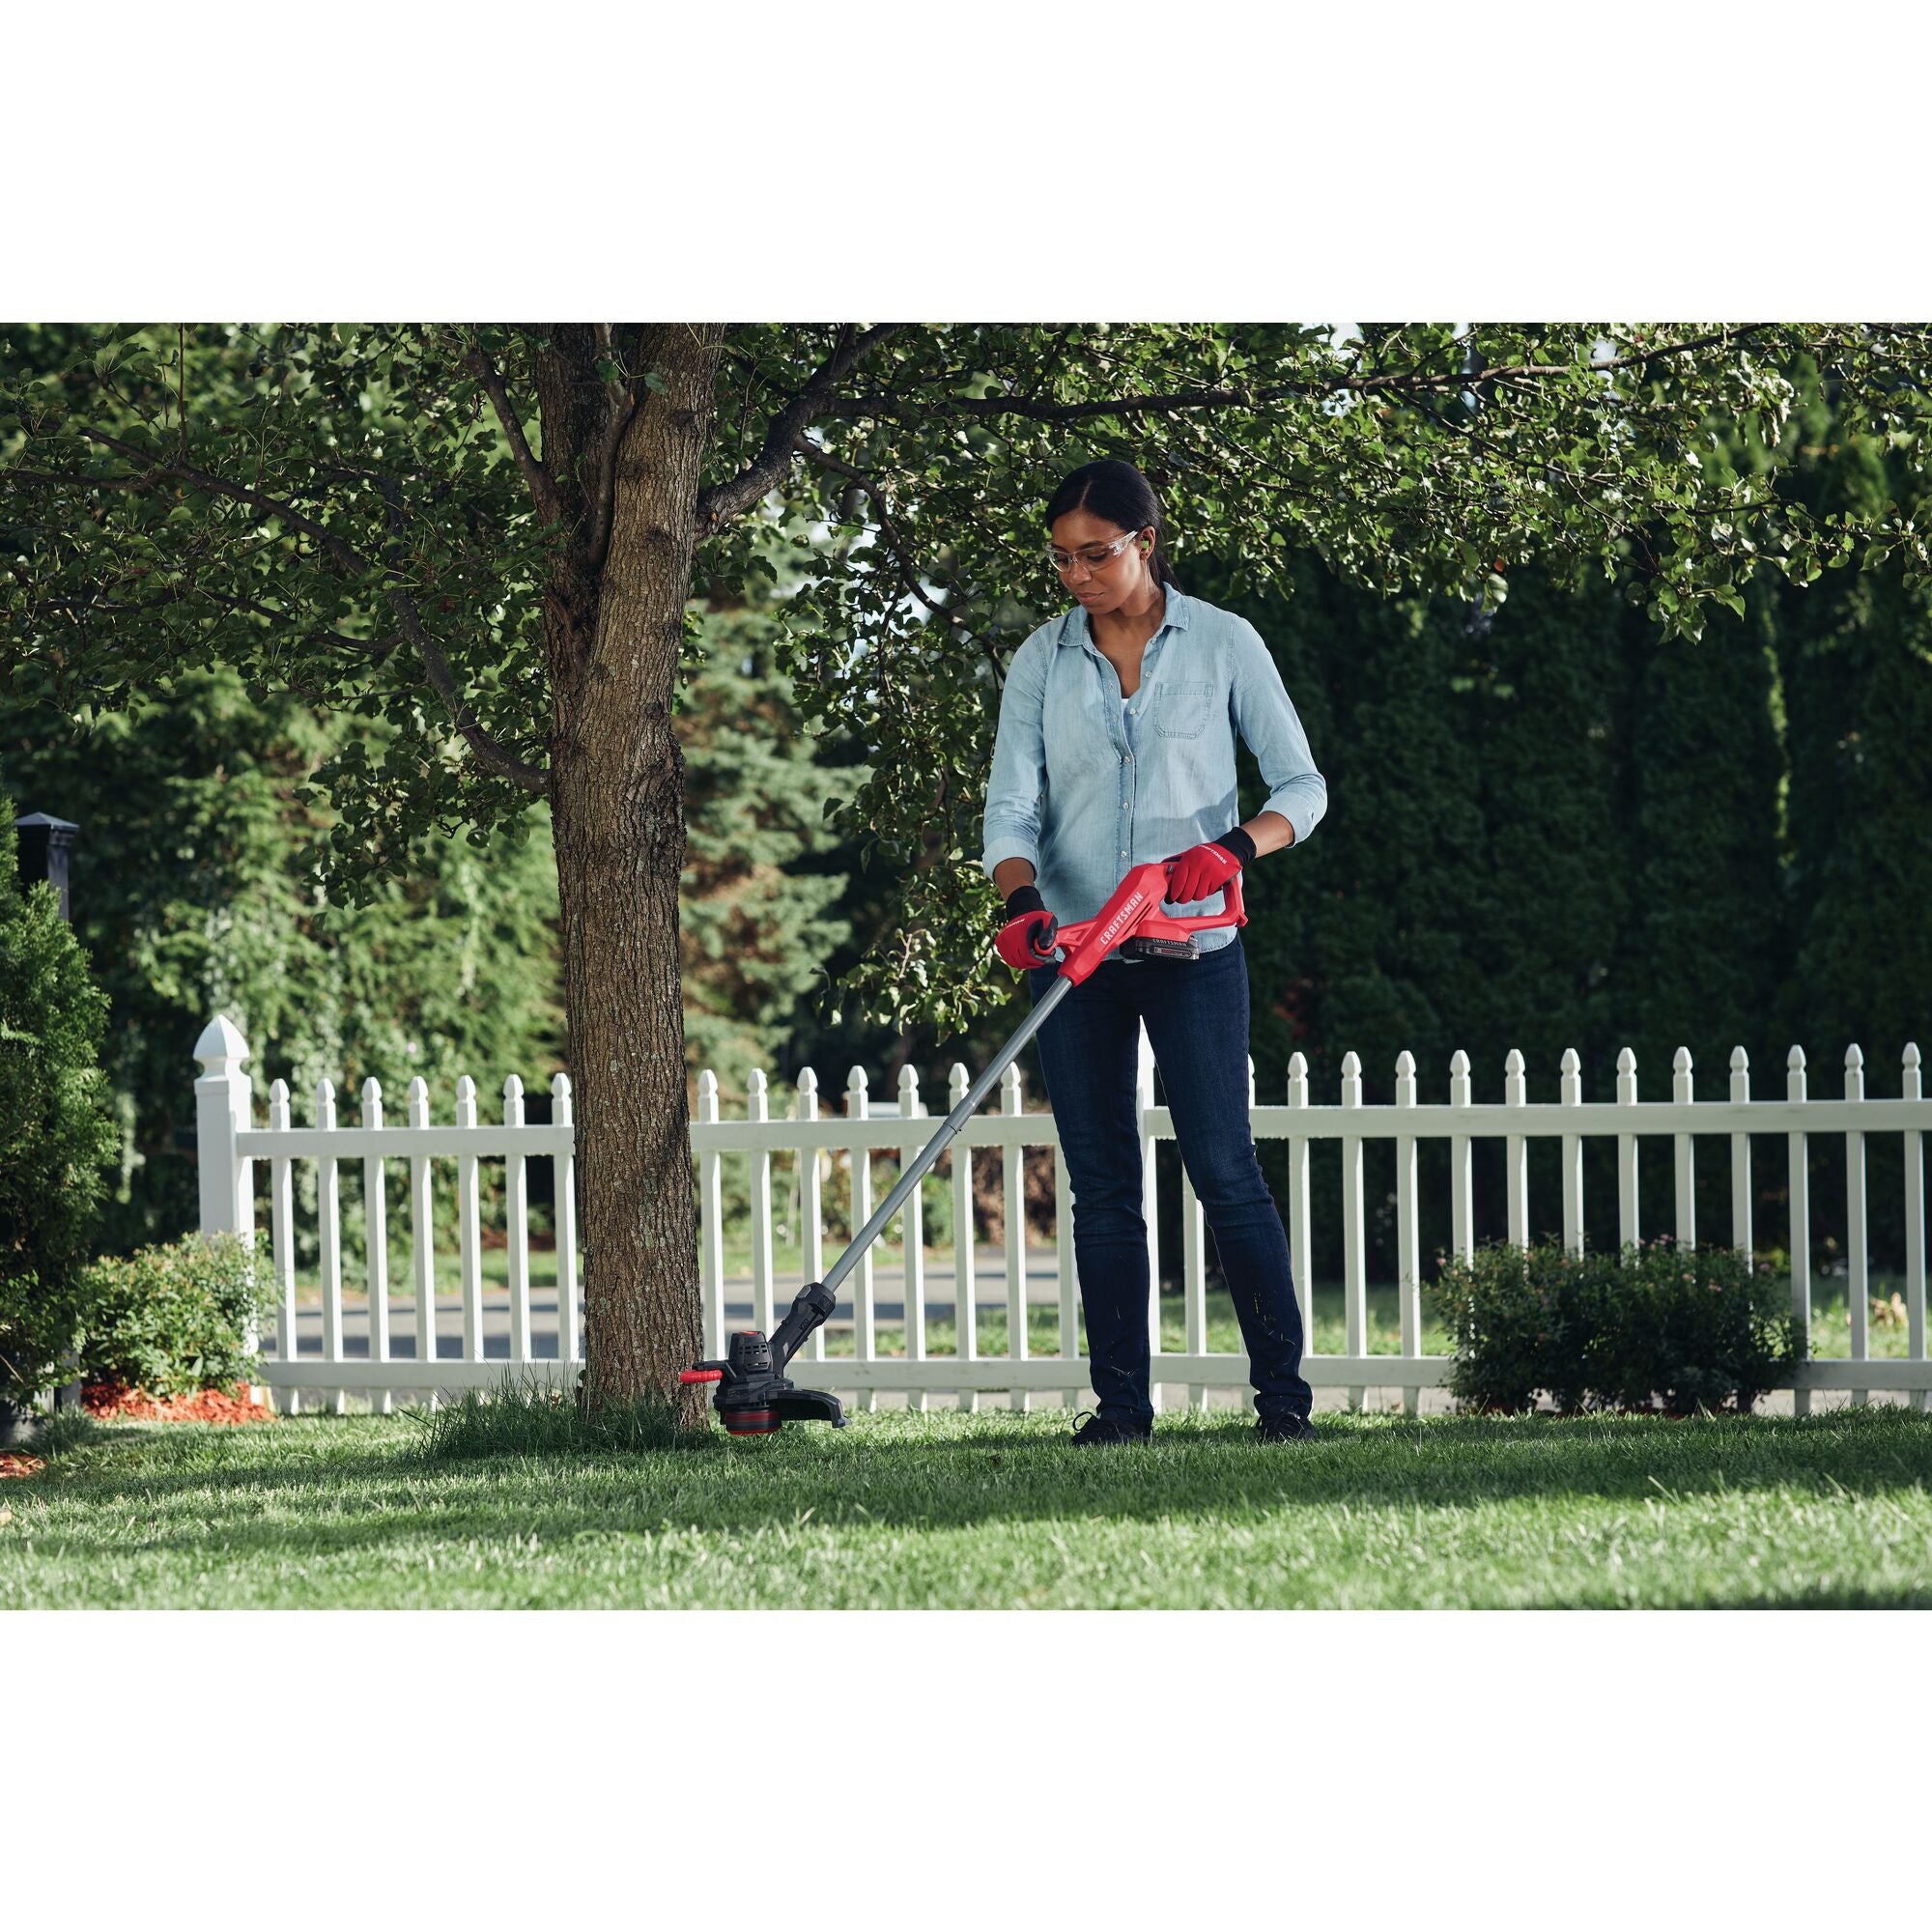 20 Volt Max* 3-Tool Cordless Combo Kit, 10-Inch String Trimmer